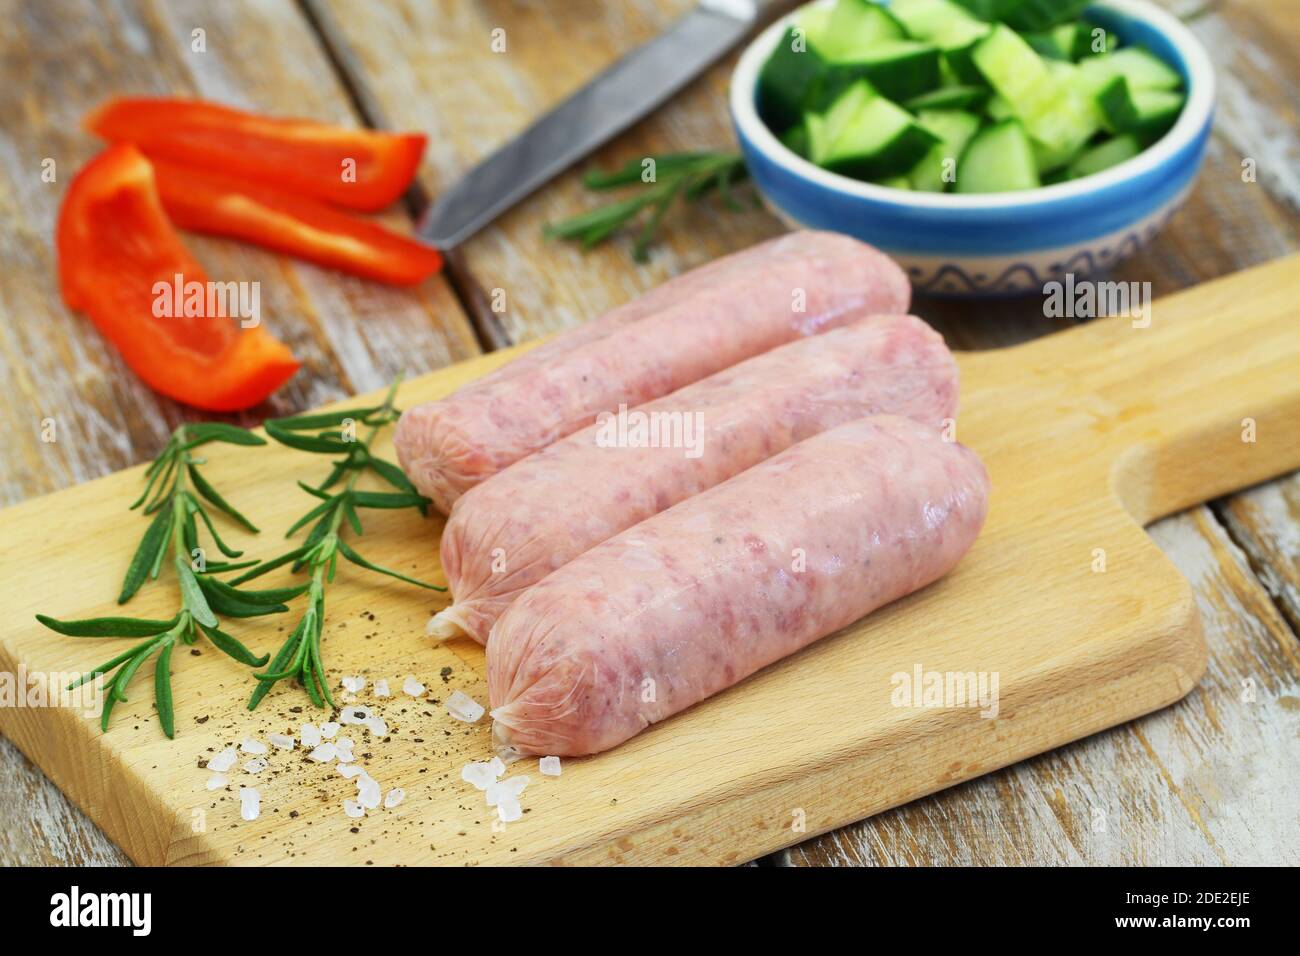 Fresh, uncooked British pork sausages on wooden board Stock Photo